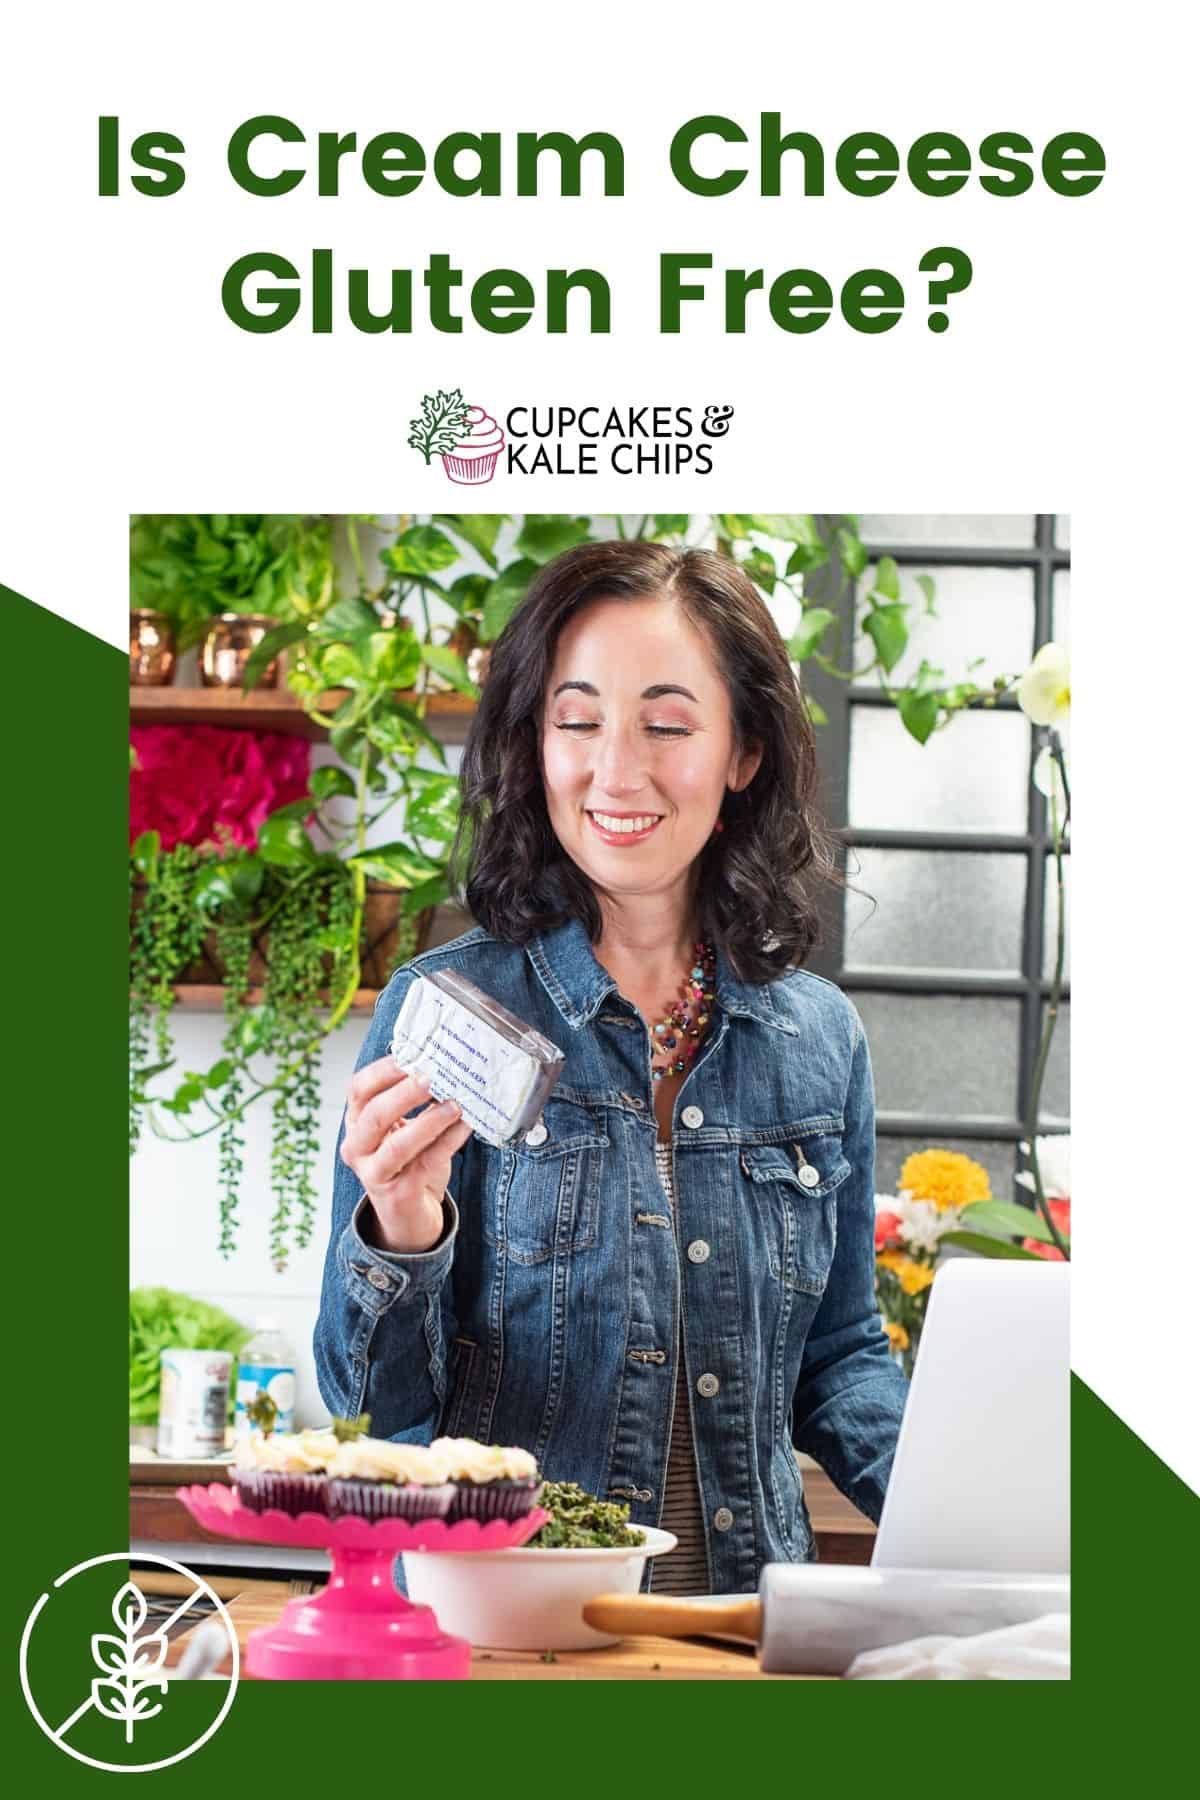 A woman standing at a kitchen countertop holding a package of cream cheese on a green and white background with text overlay that says, "Is Cream Cheese Gluten Free?"